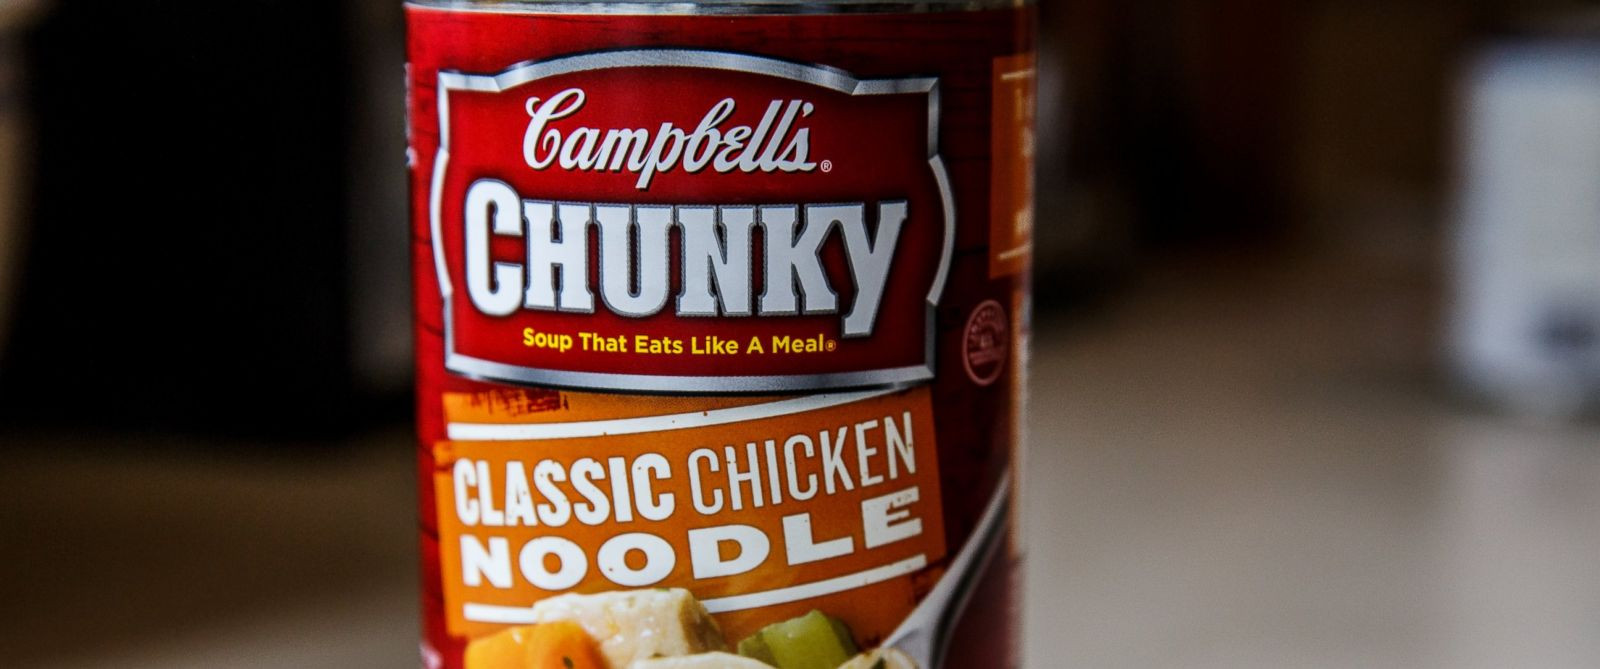 Campbell Chicken Noodle Soup
 Campbell Soup May Be e First Major pany to List GMO